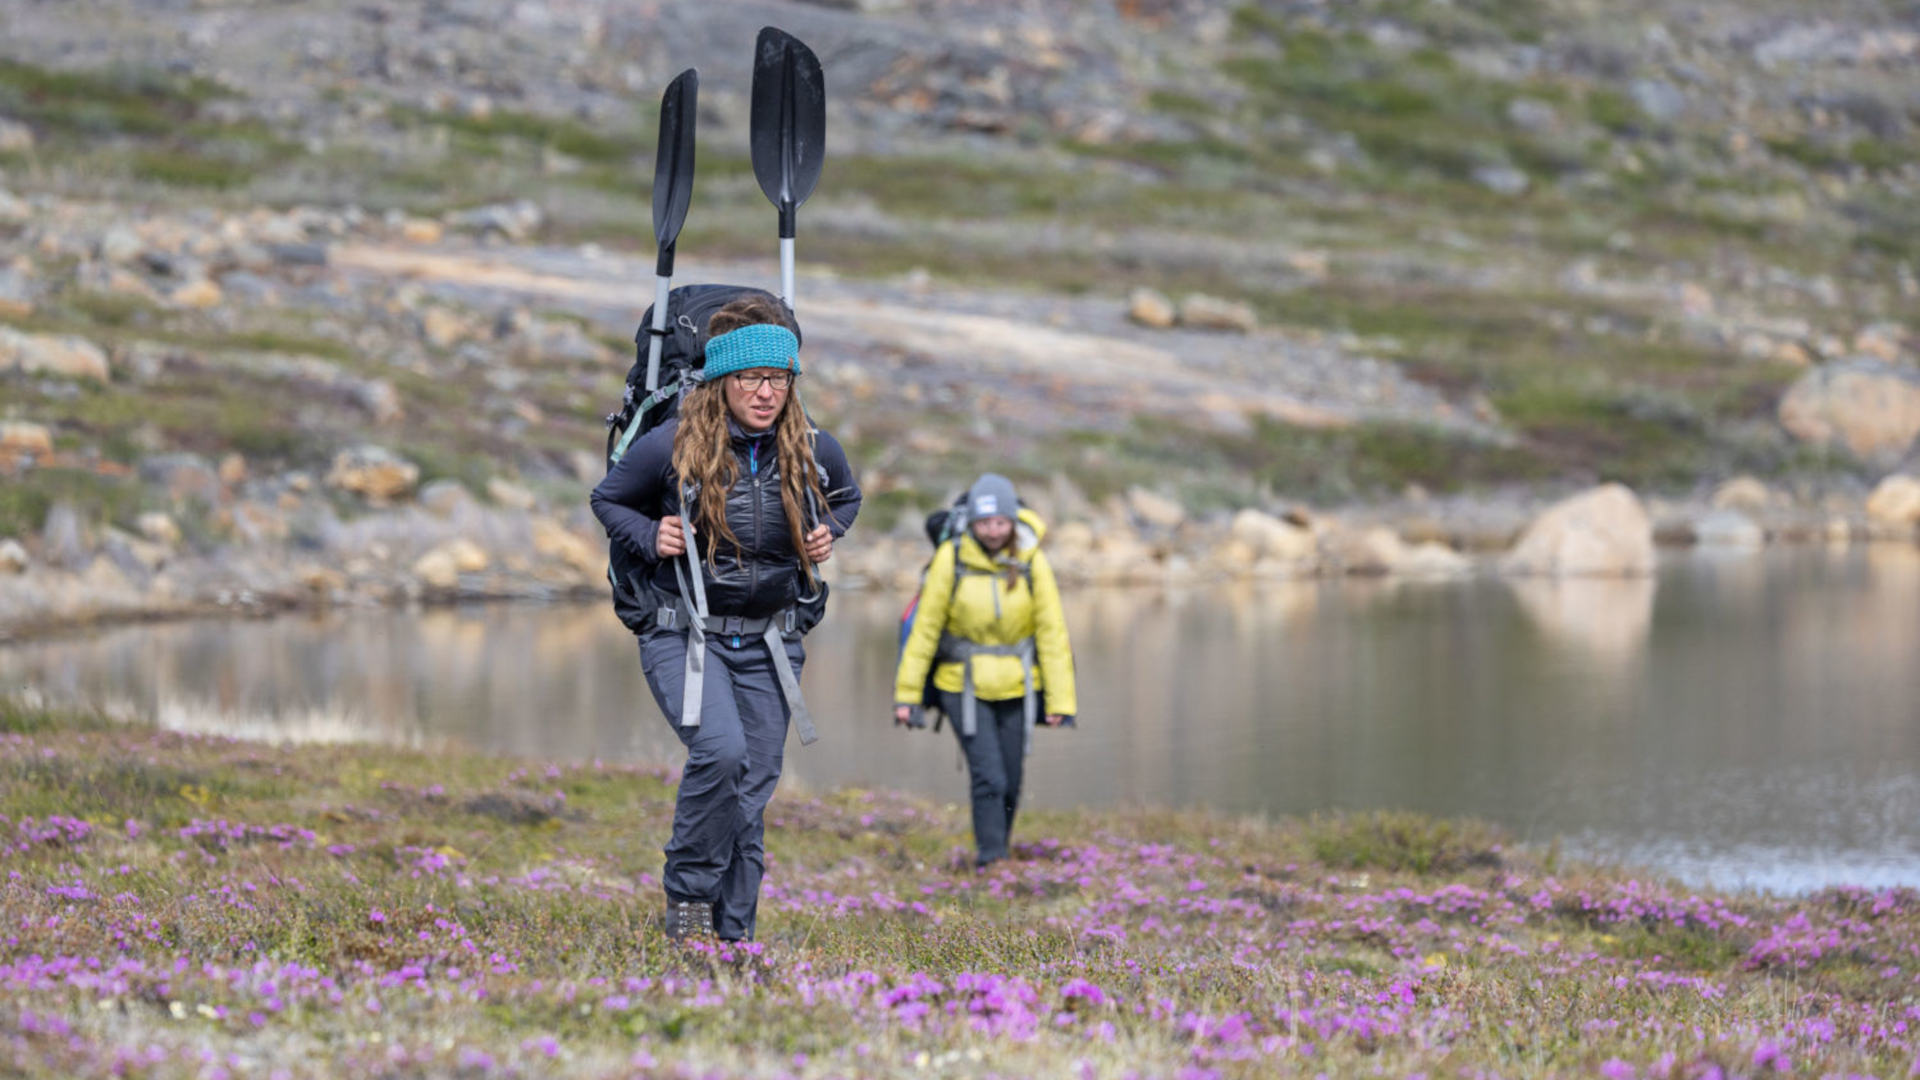 University of Maine researchers Václava Hazuková (front) and Ansley Grider hike over tundra on their way to study lakes in West Greenland.